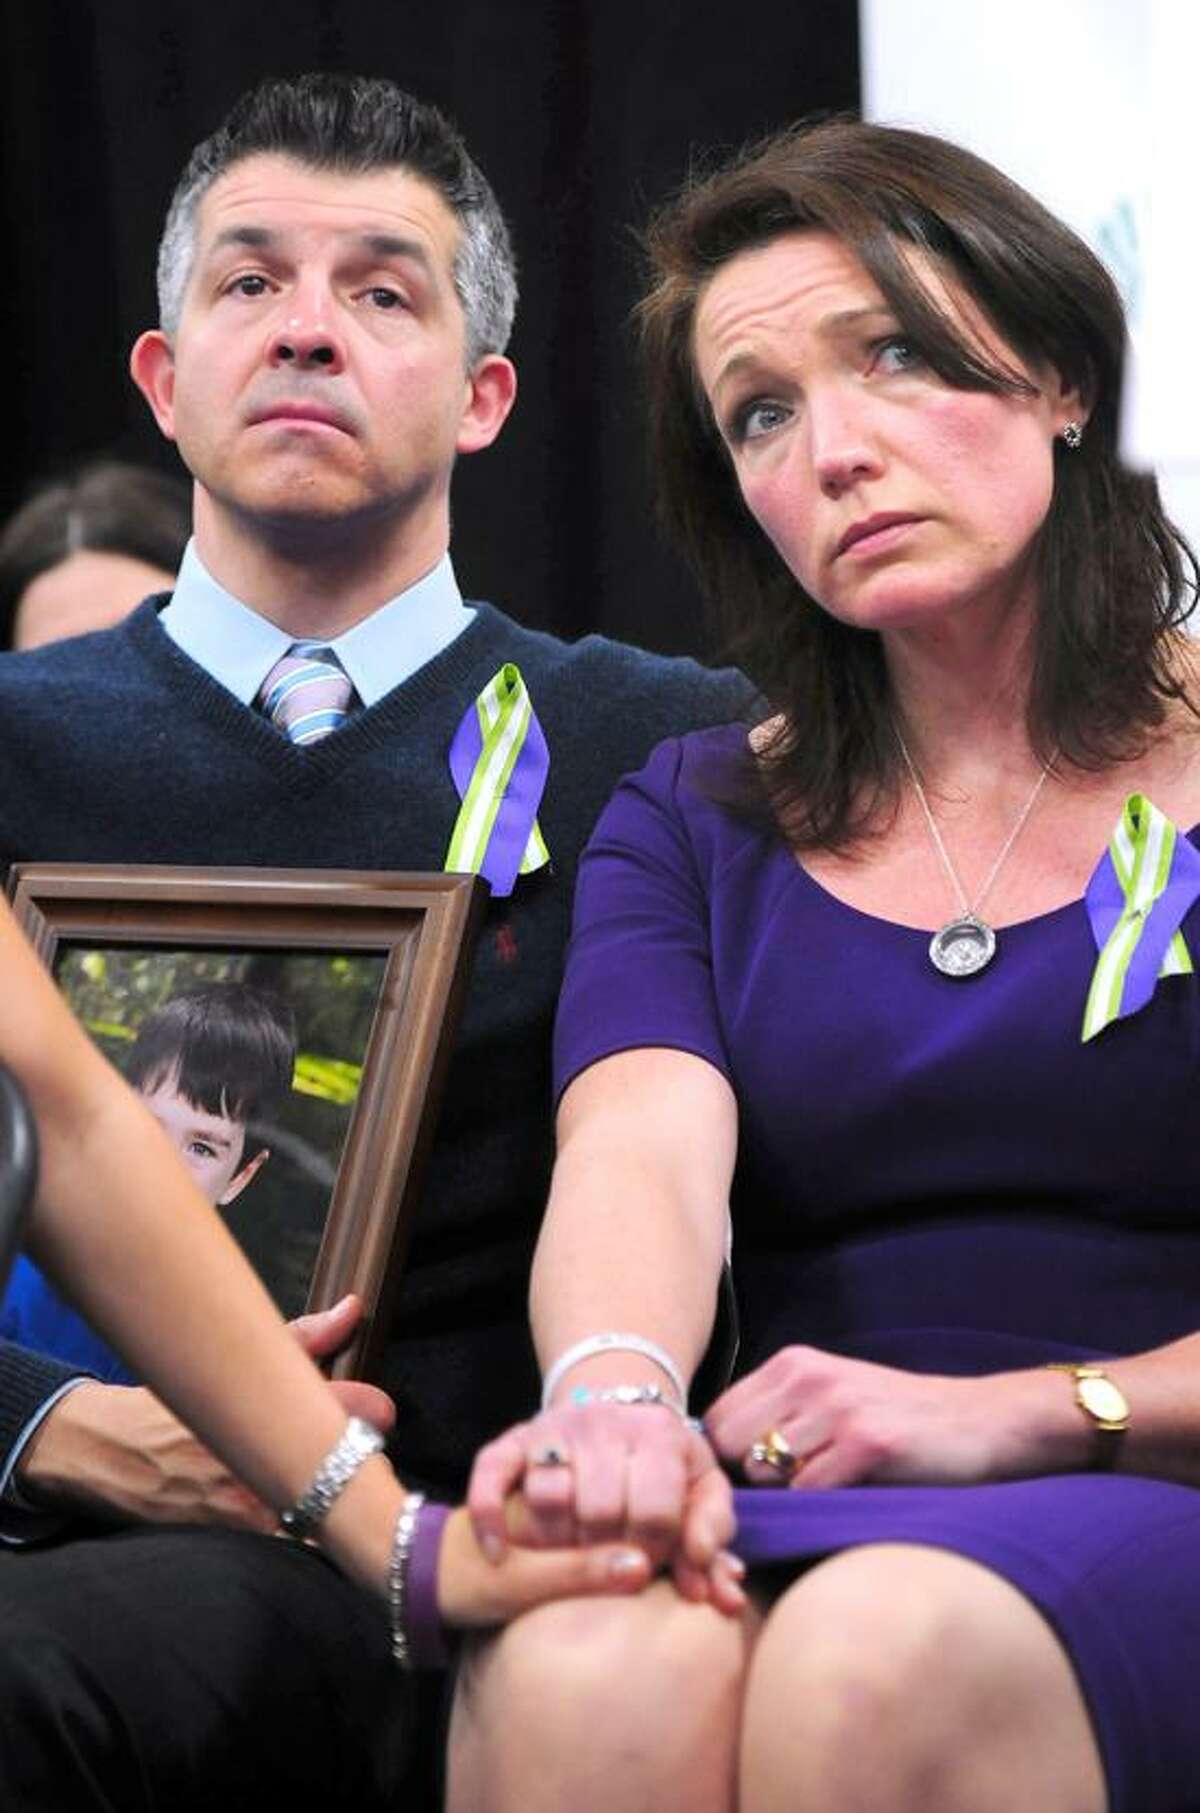 Ian Hockley (left) holding a photograph of his son, Dylan, and his wife, Nicole (right), listen to speakers a press conference announcing the launch of Sandy Hook Promise at Edmond Town Hall in Newtown on 1/14/2013. Dylan was killed in the Sandy Hook Elementary School shootings.Photo by Arnold Gold/New Haven Register